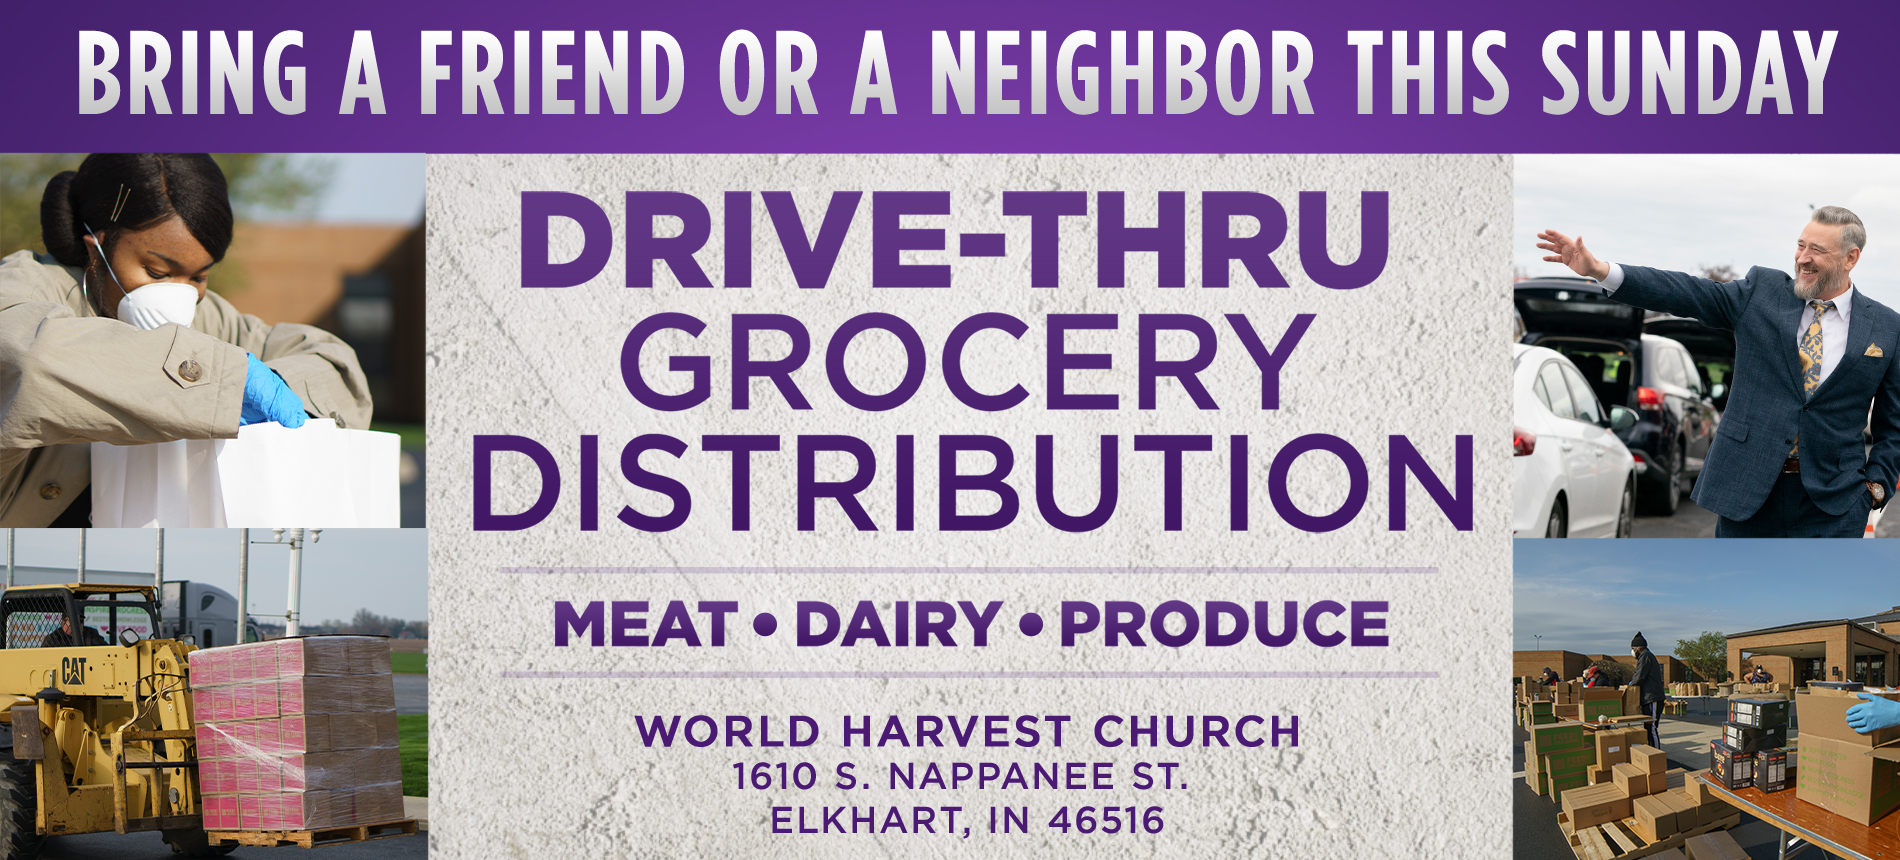 Bring a Friend or a Neighbor This Sunday Drive-Thru Grocery Distribution Meat, Dairy, Produce. World Harvest Church 4595 Gender Road Canal Winchester, OH 43110